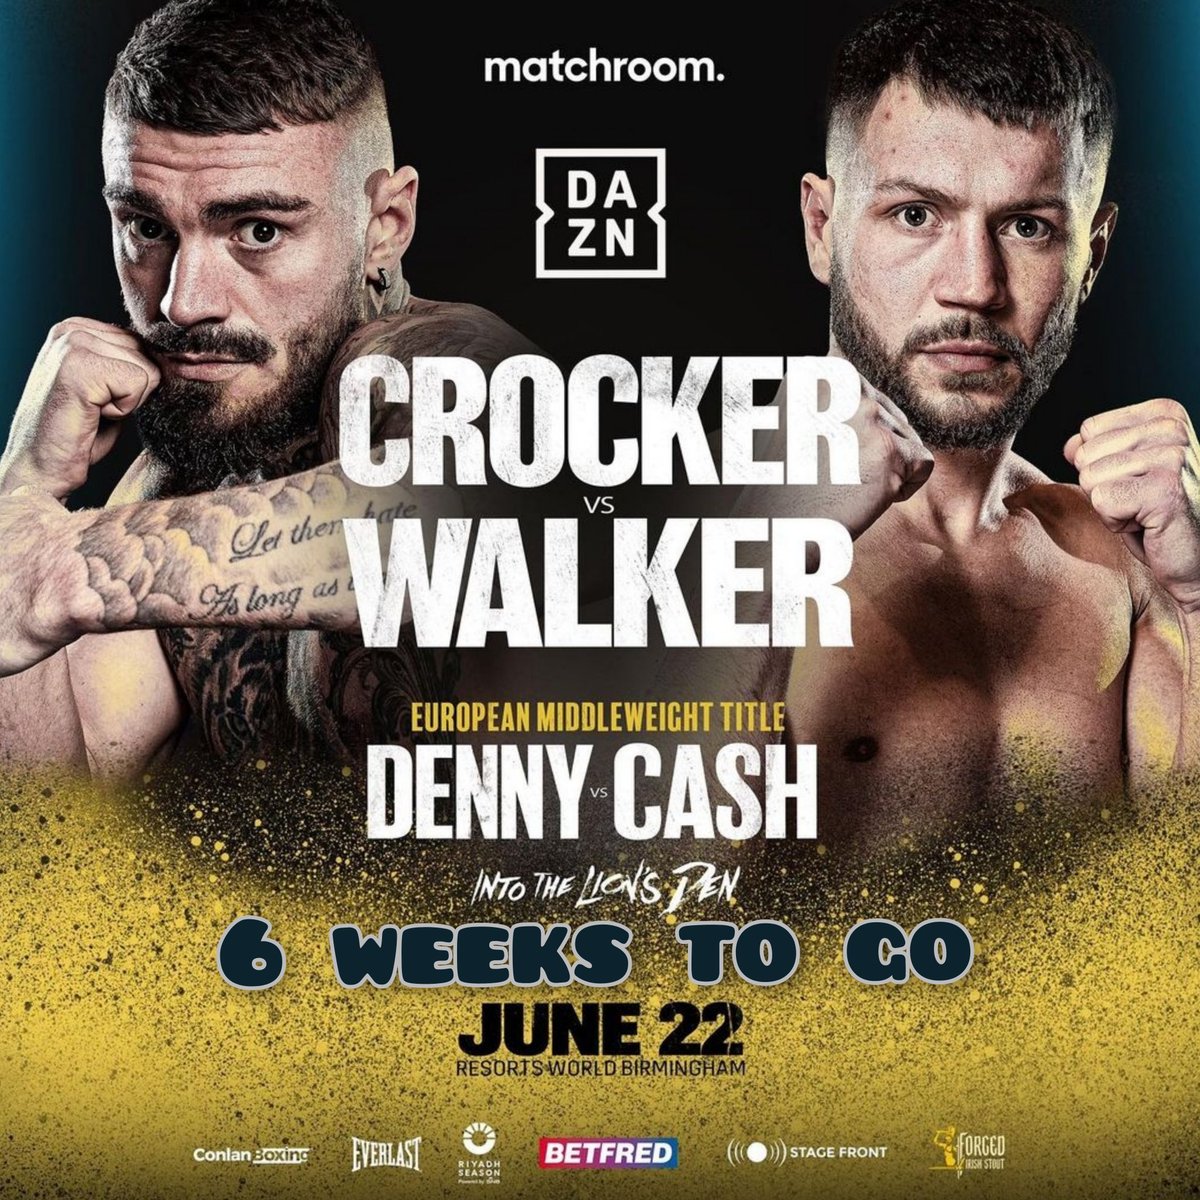 6 Weeks to go @lewiscrocker1 returns for fight 20 as a pro and his 3rd consecutive fight on @DAZNBoxing Crocker (19-0) enters enemy territory and he is promising to stop Conah Walker (13-2-1) to become WBA International Welterweight champion #VivaLaCroc #CrockerWalker